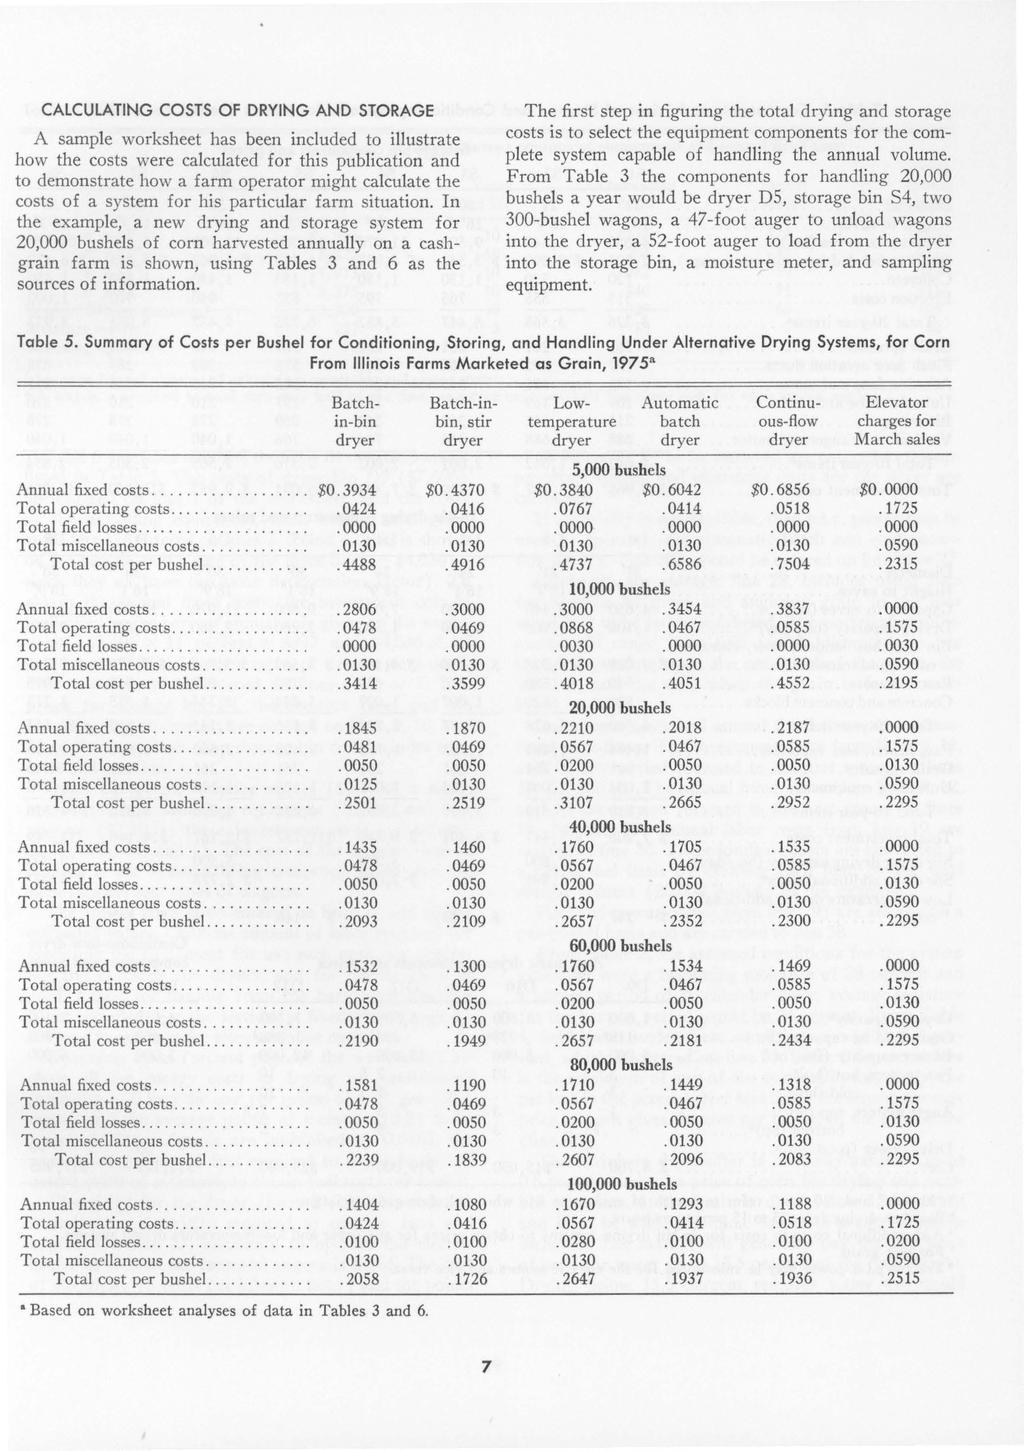 CALCULATING COSTS OF DRYING AND STORAGE A sample worksheet has been included to illustrate how the costs were calculated for this publication and to demonstrate how a farm operator might calculate